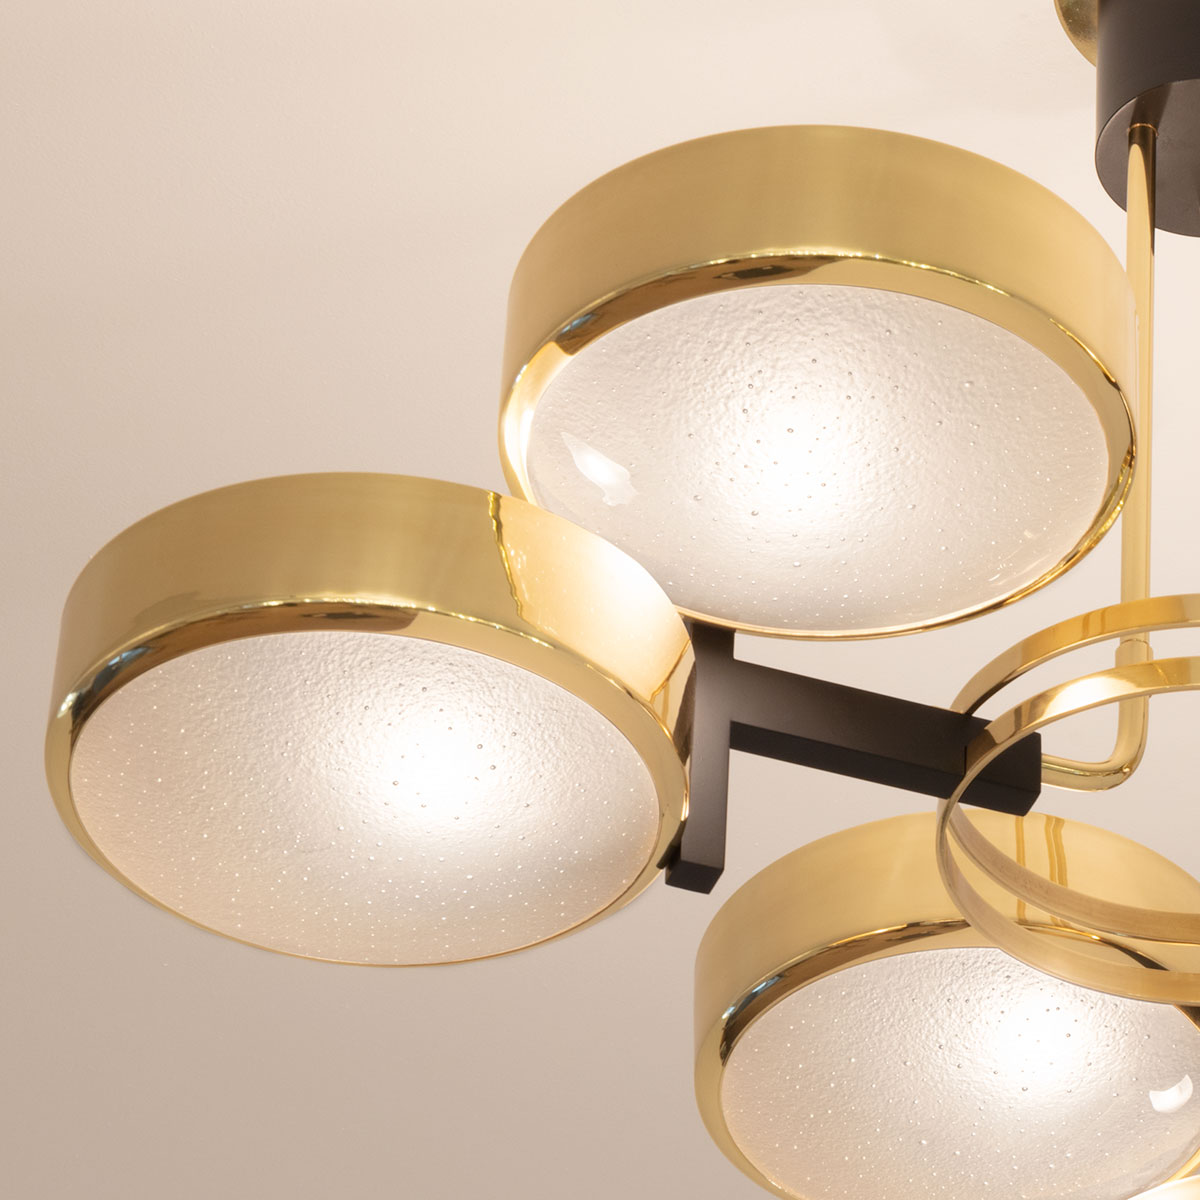 Eclissi ceiling light by gaspare asaro